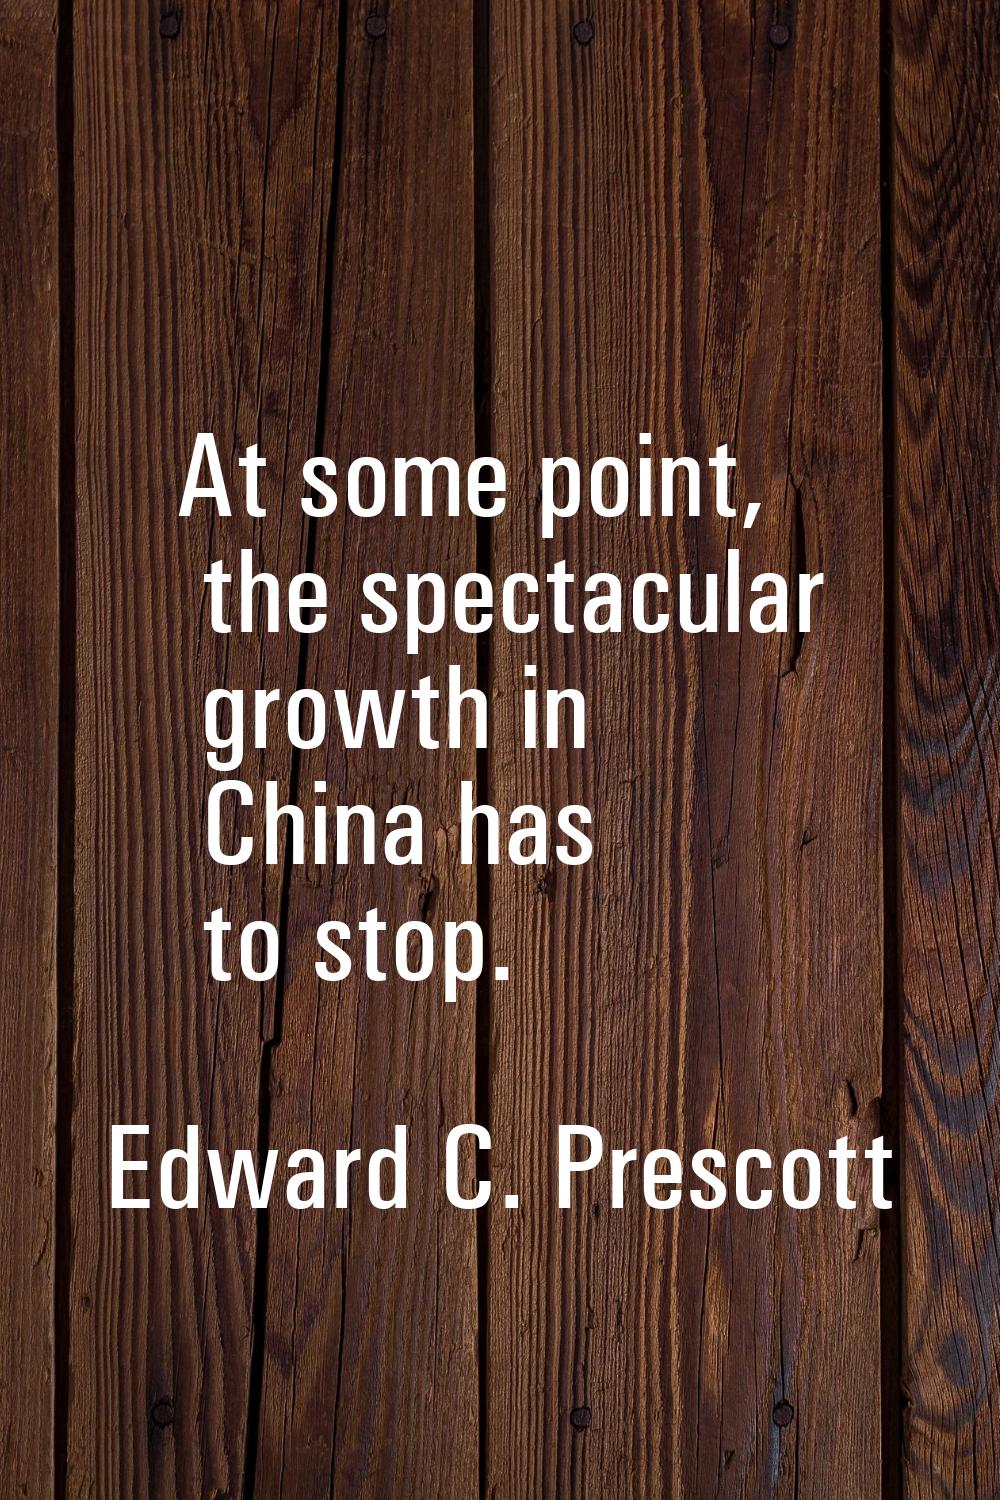 At some point, the spectacular growth in China has to stop.